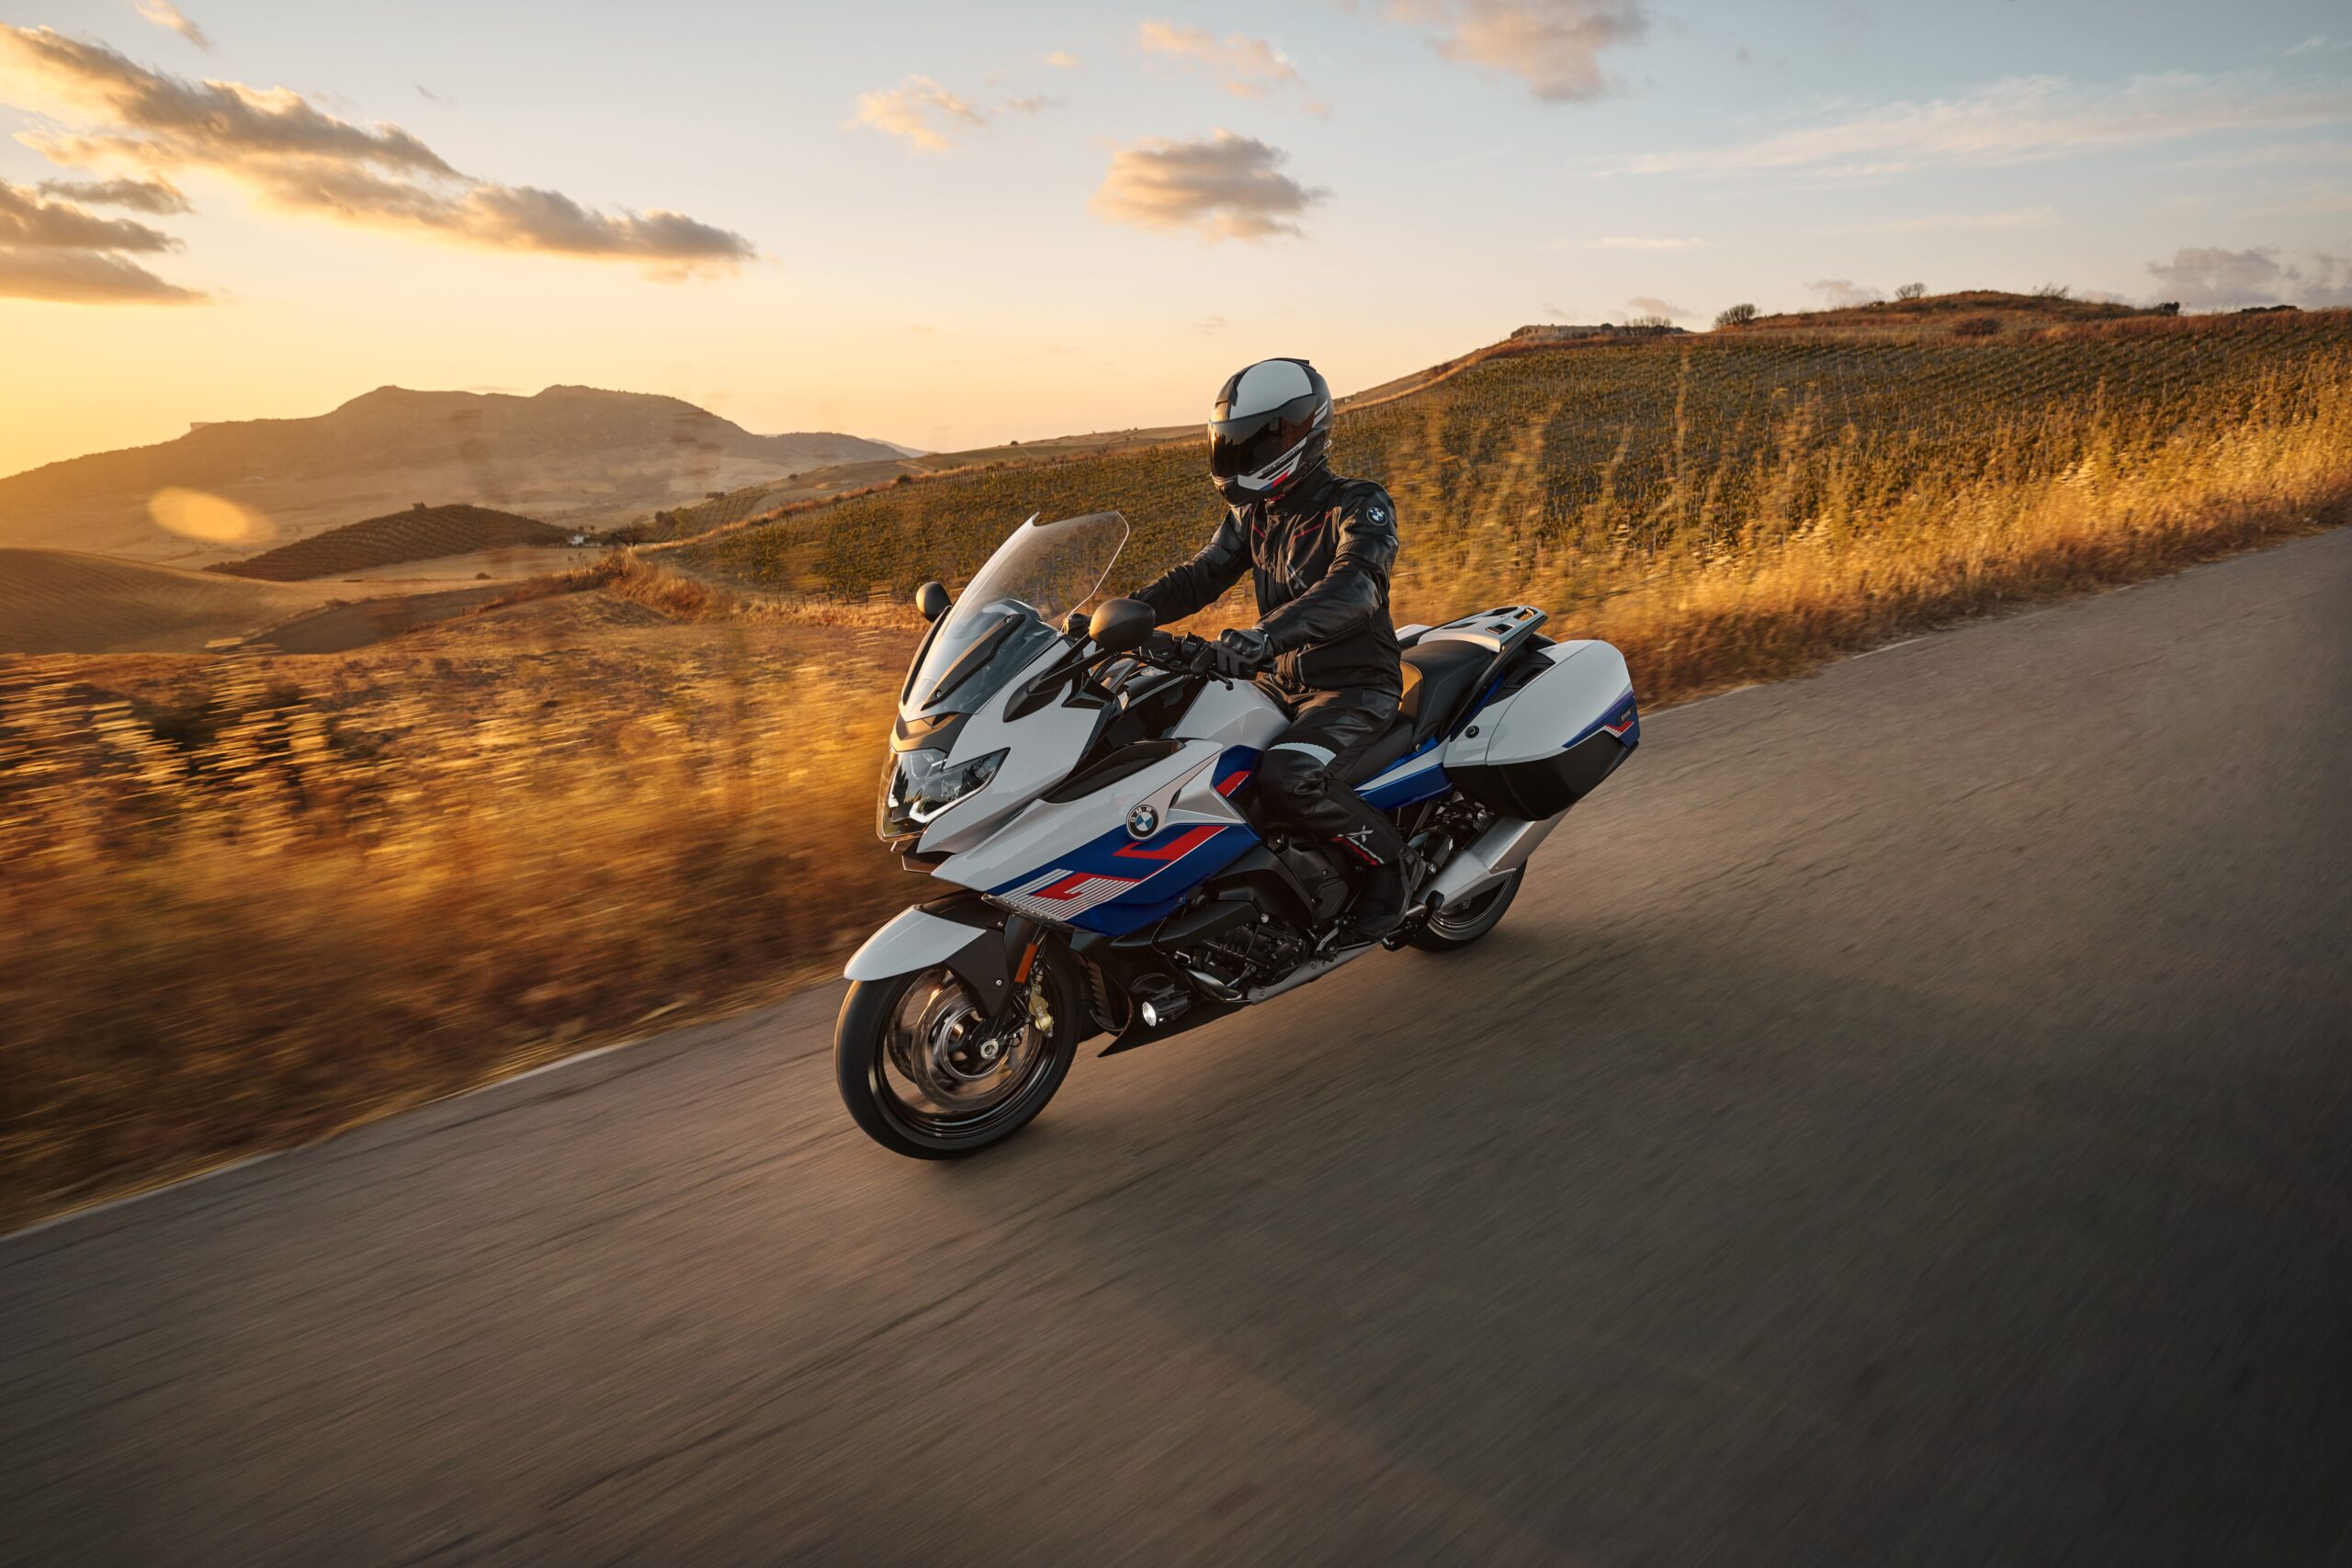 Image 1 The New BMW K 1600 GT scaled